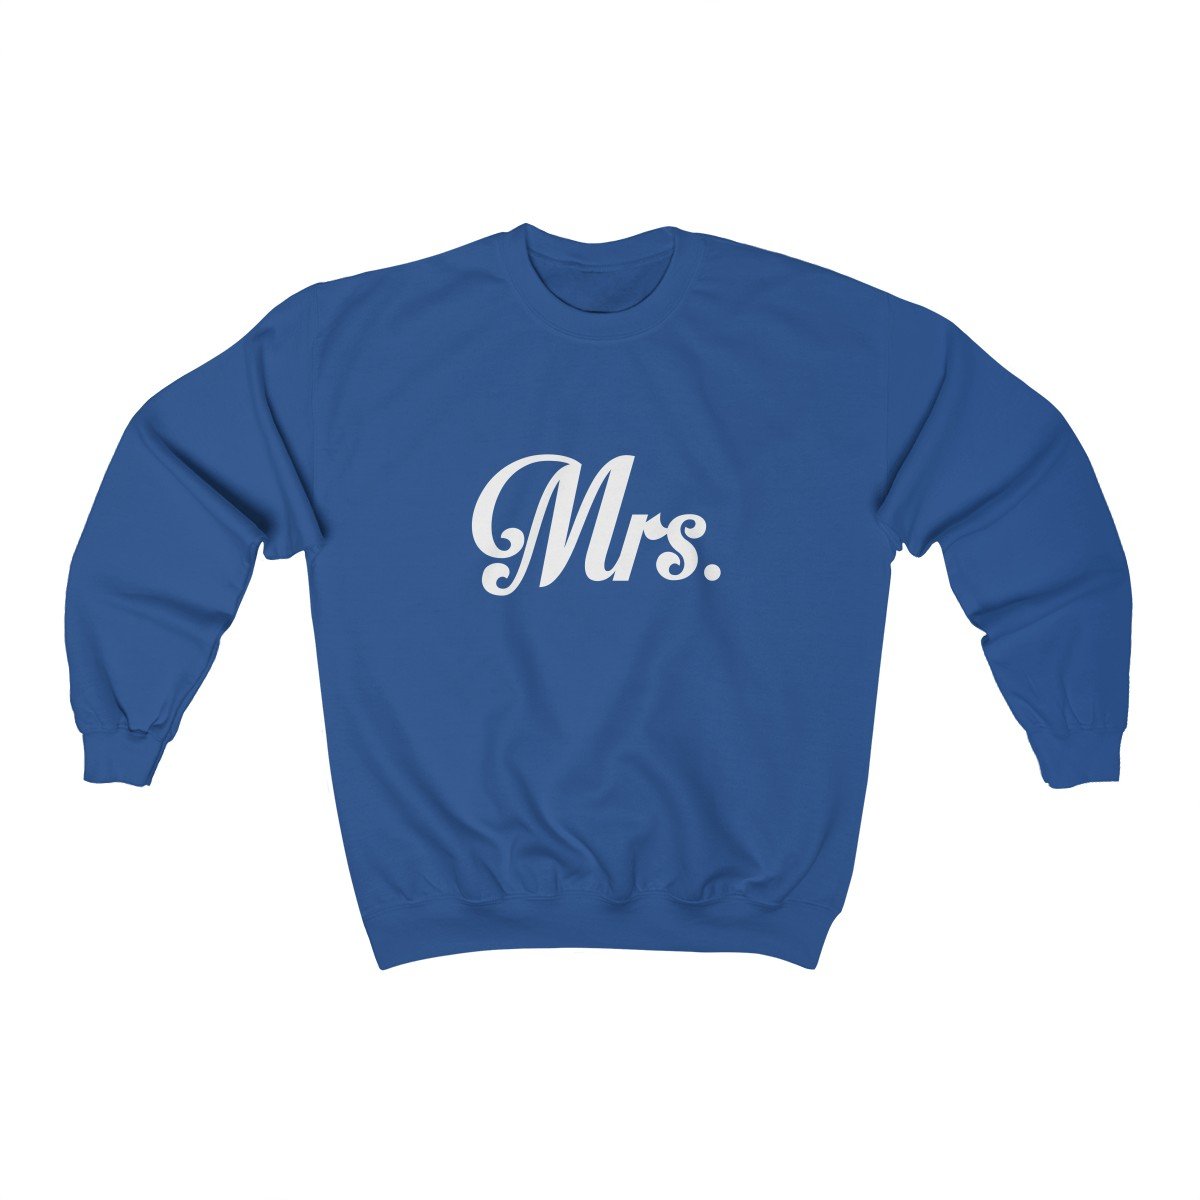 Mr and Mrs Couples Sweatshirts, Cute Couple Matching Sweater, Future mr mrs, Custom Personalized His and Hers Gift bride and groom Starcove Fashion